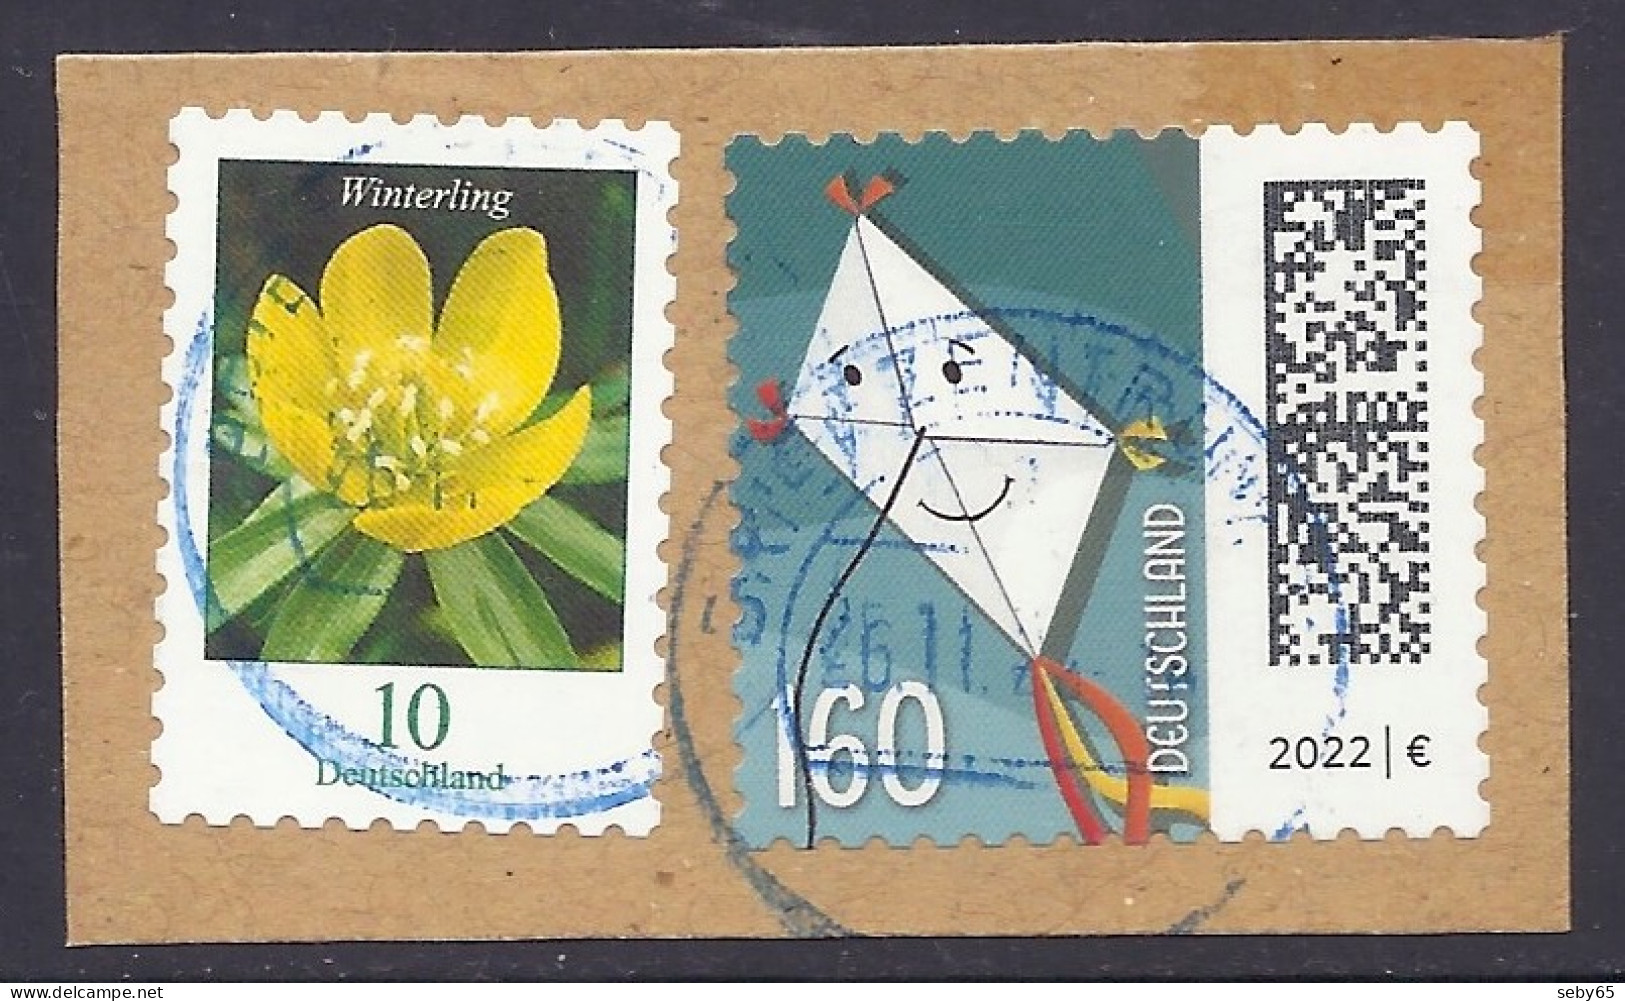 Germany 2022 - Welt Der Briefe, Definitives, The World Of Letters, Letter Bar Code - Used - Used Stamps